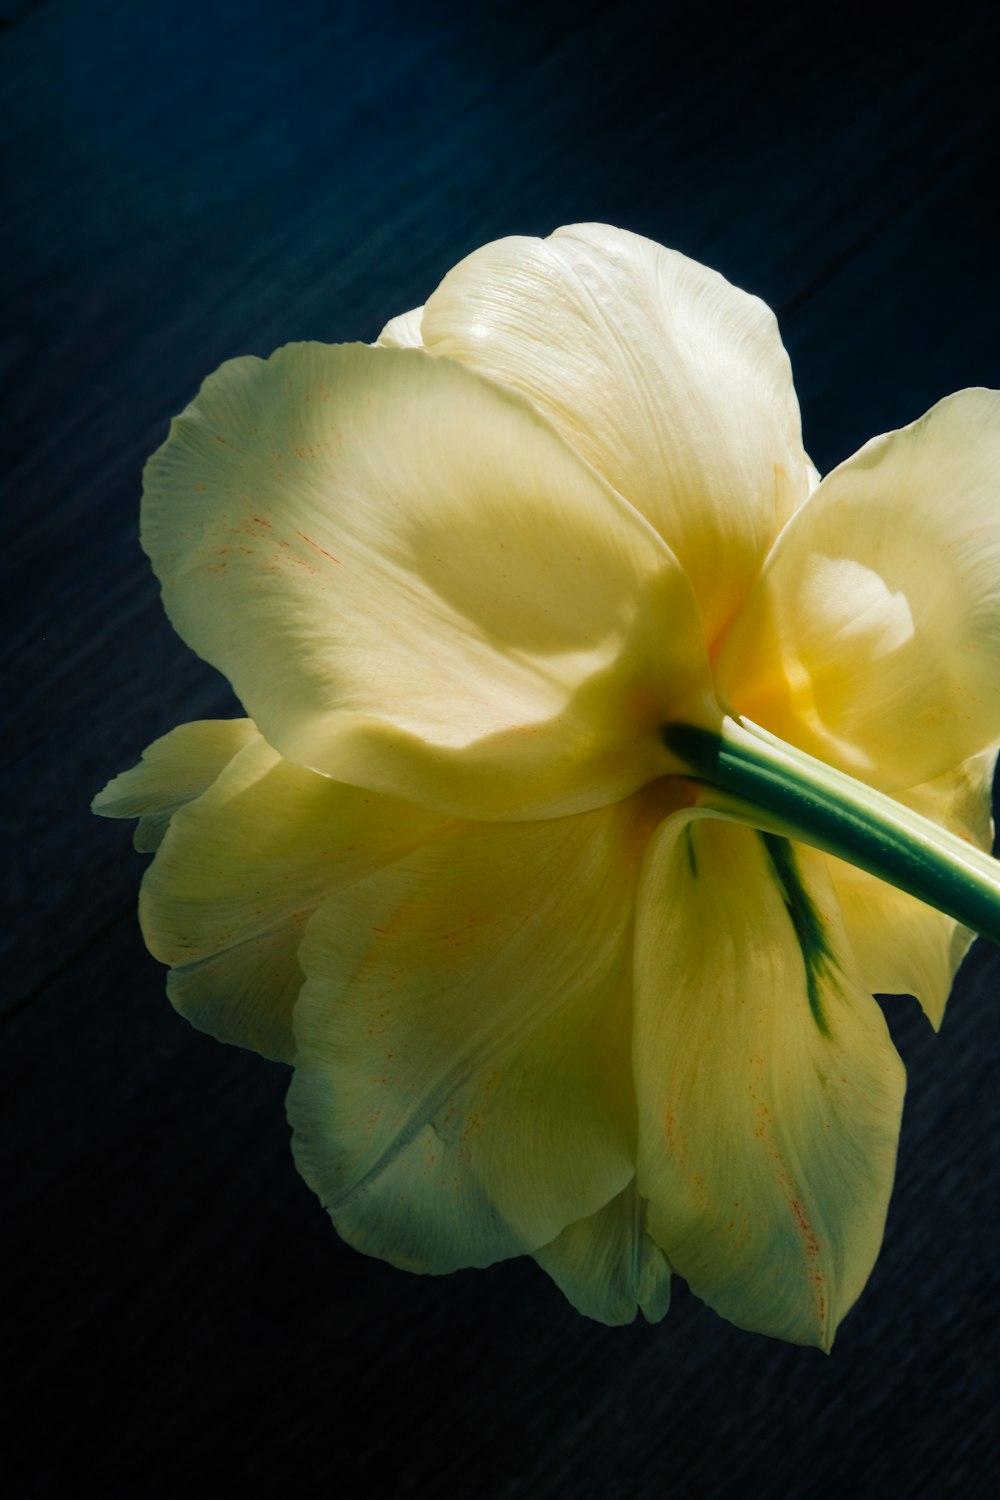 a single yellow flower with a green stem